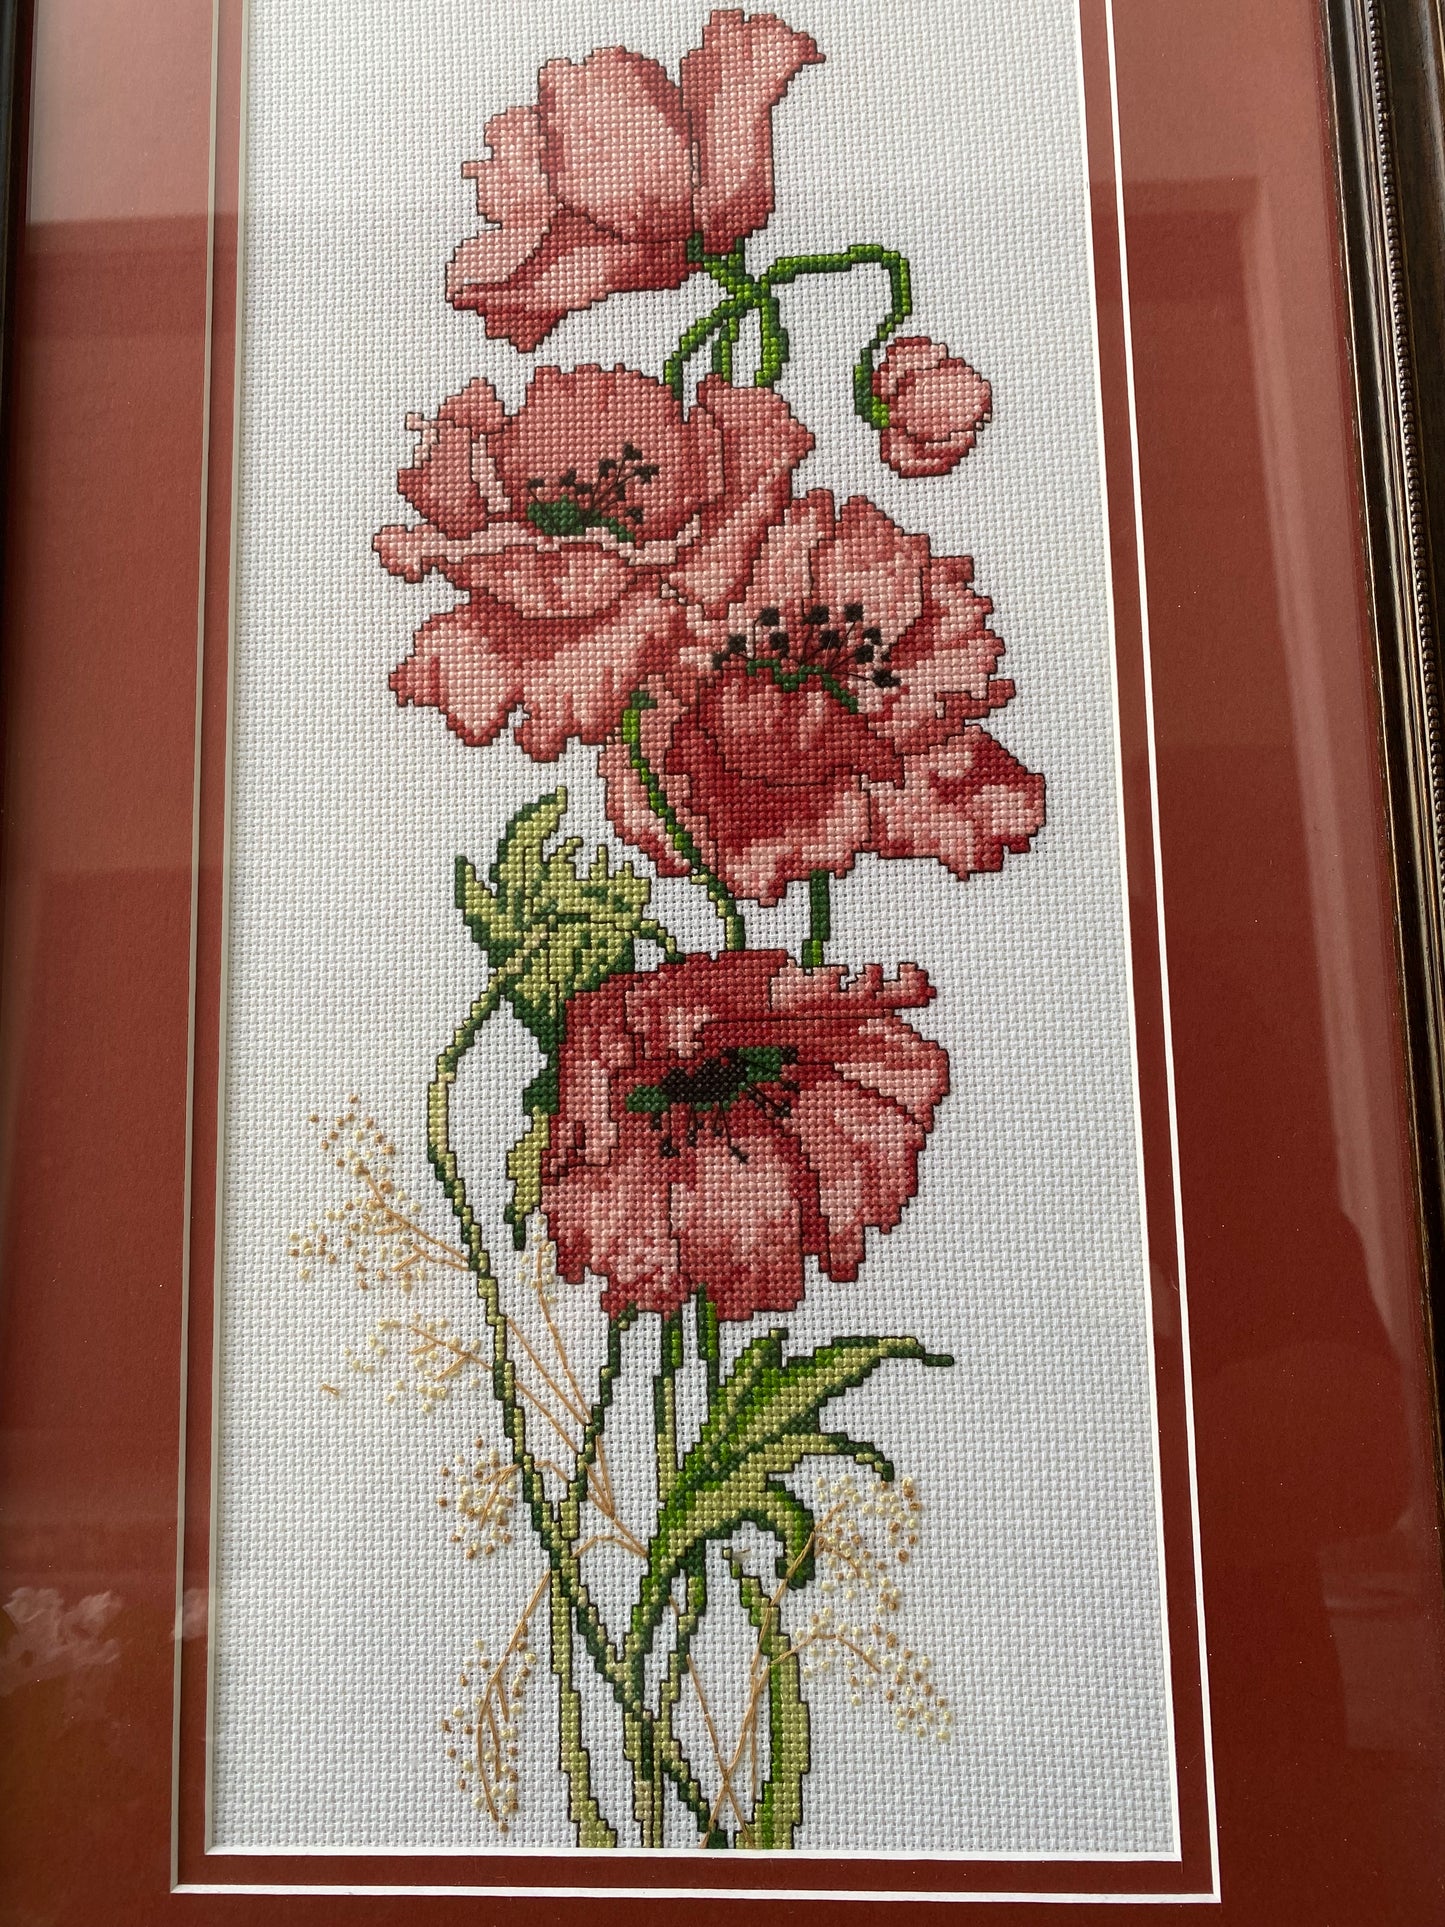 Hand Stitched Poppies Painting